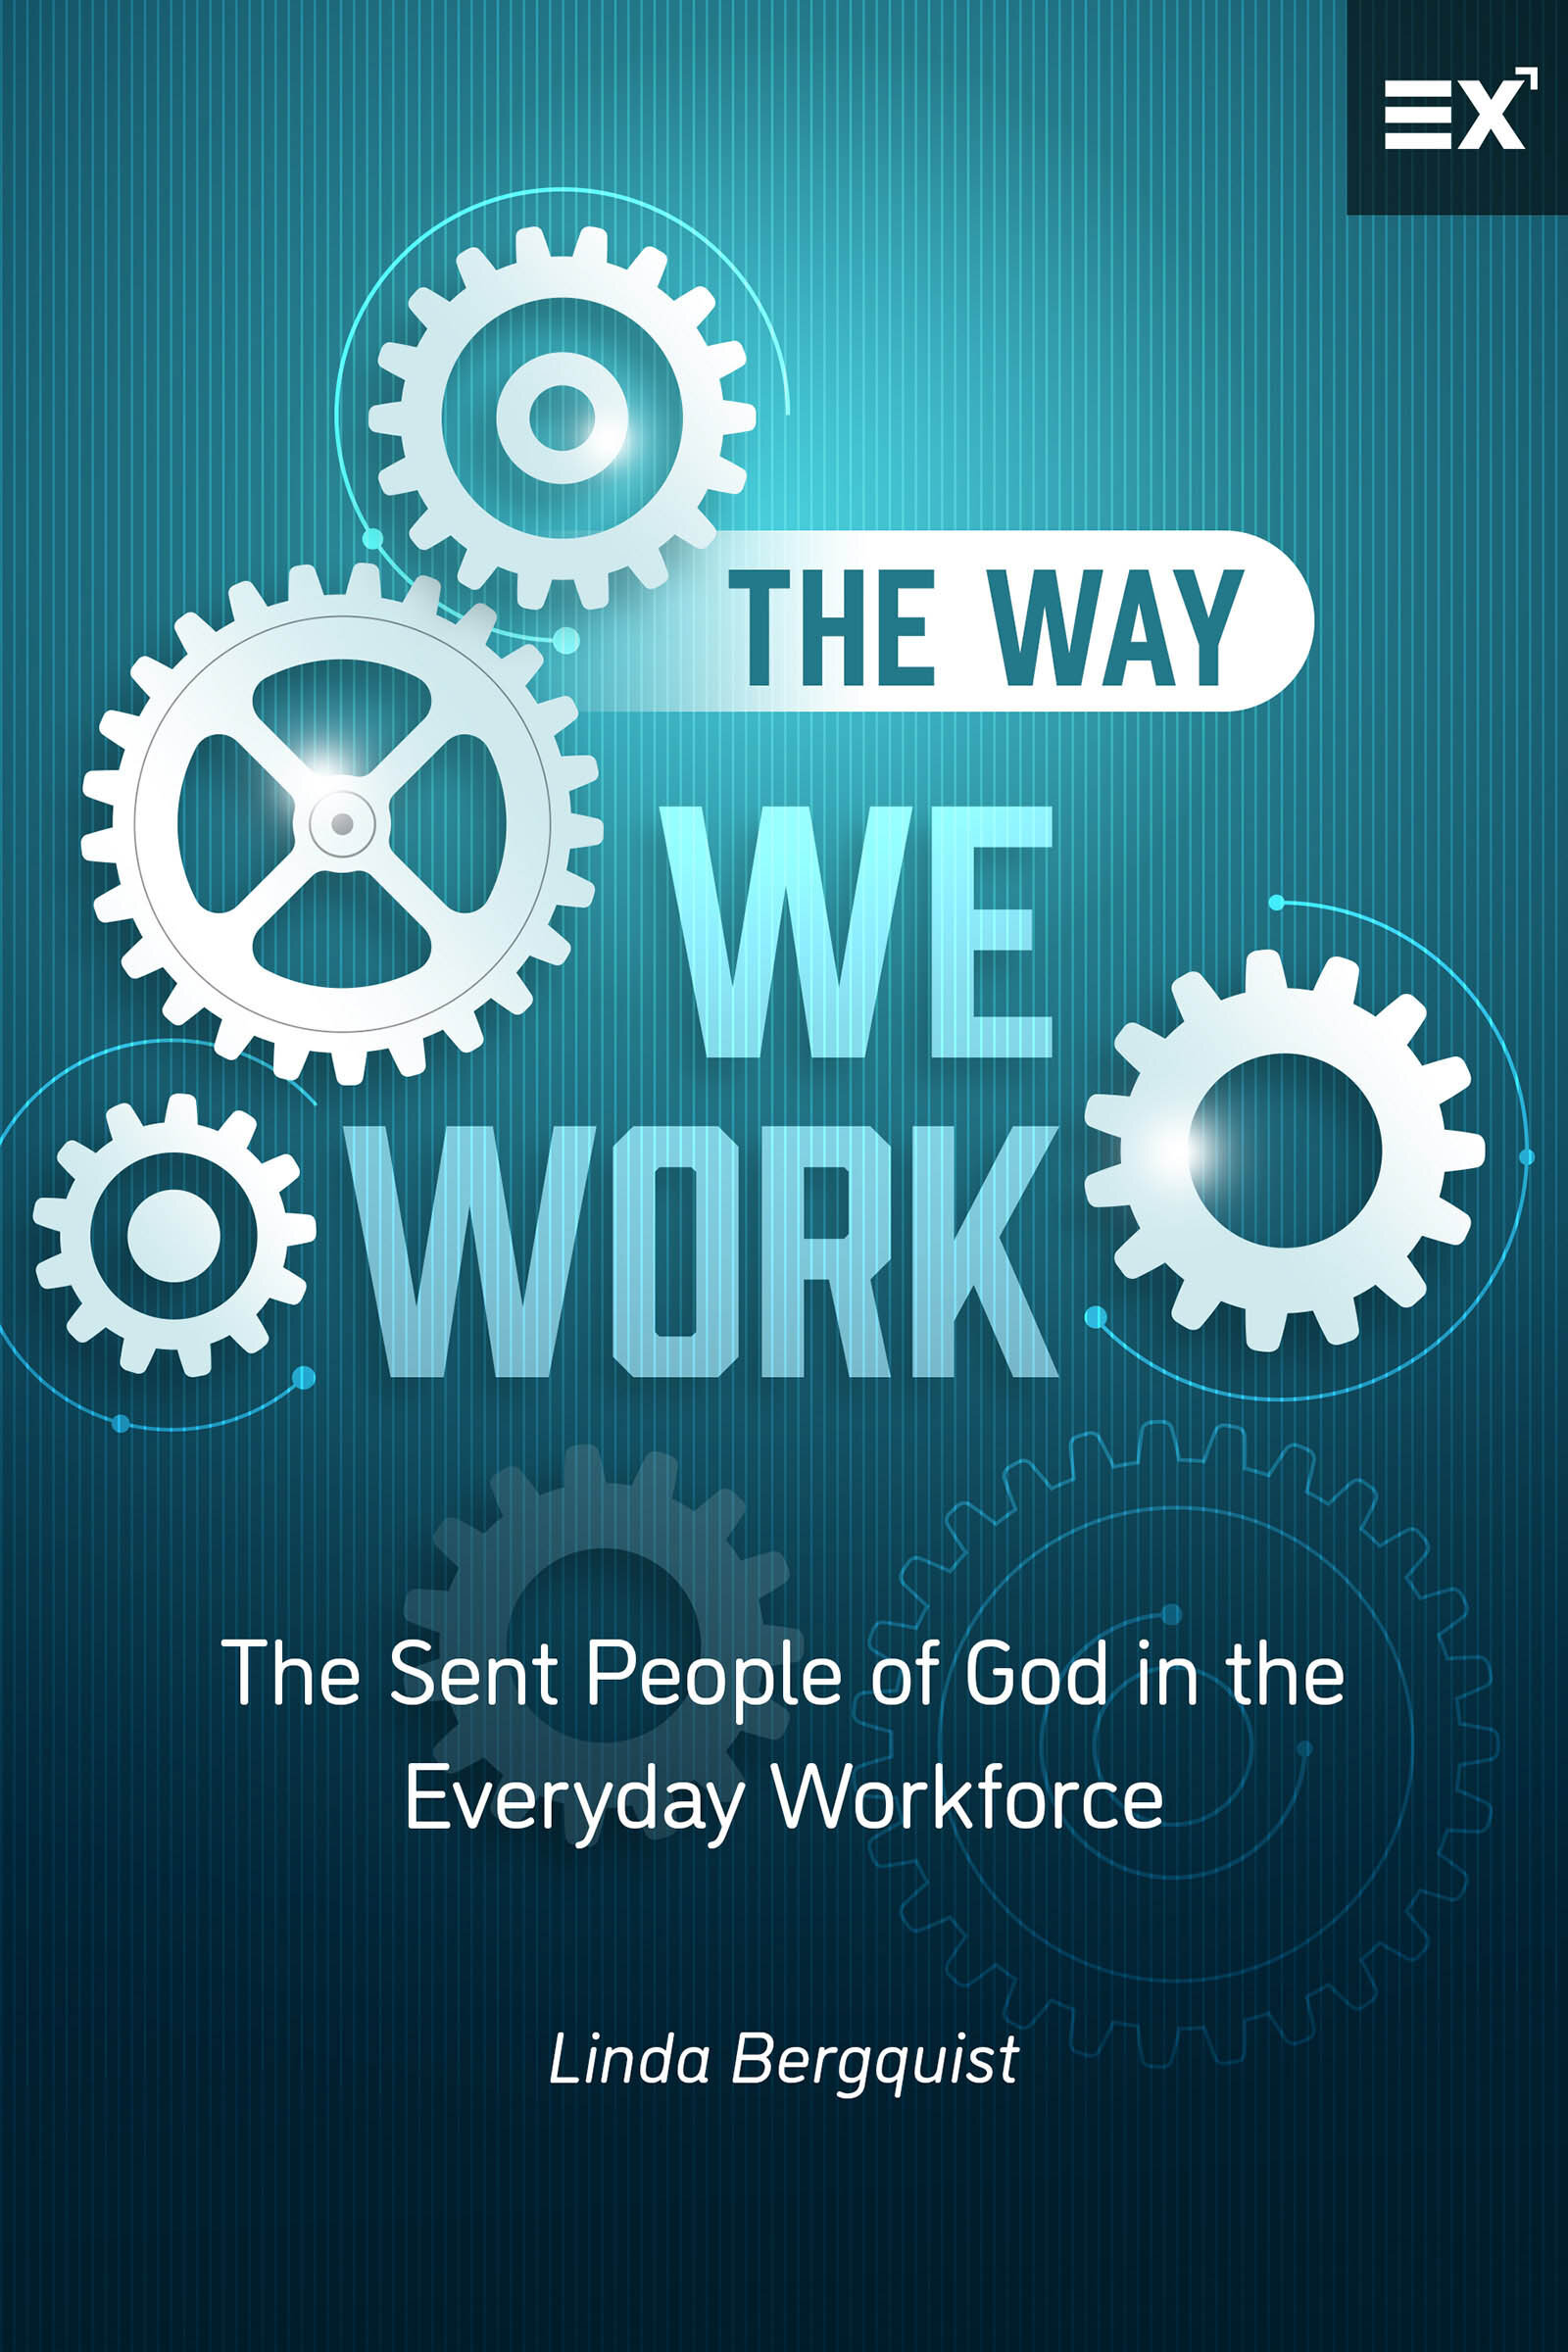 The Way We Work: The Sent People of God in the Everyday Workforce